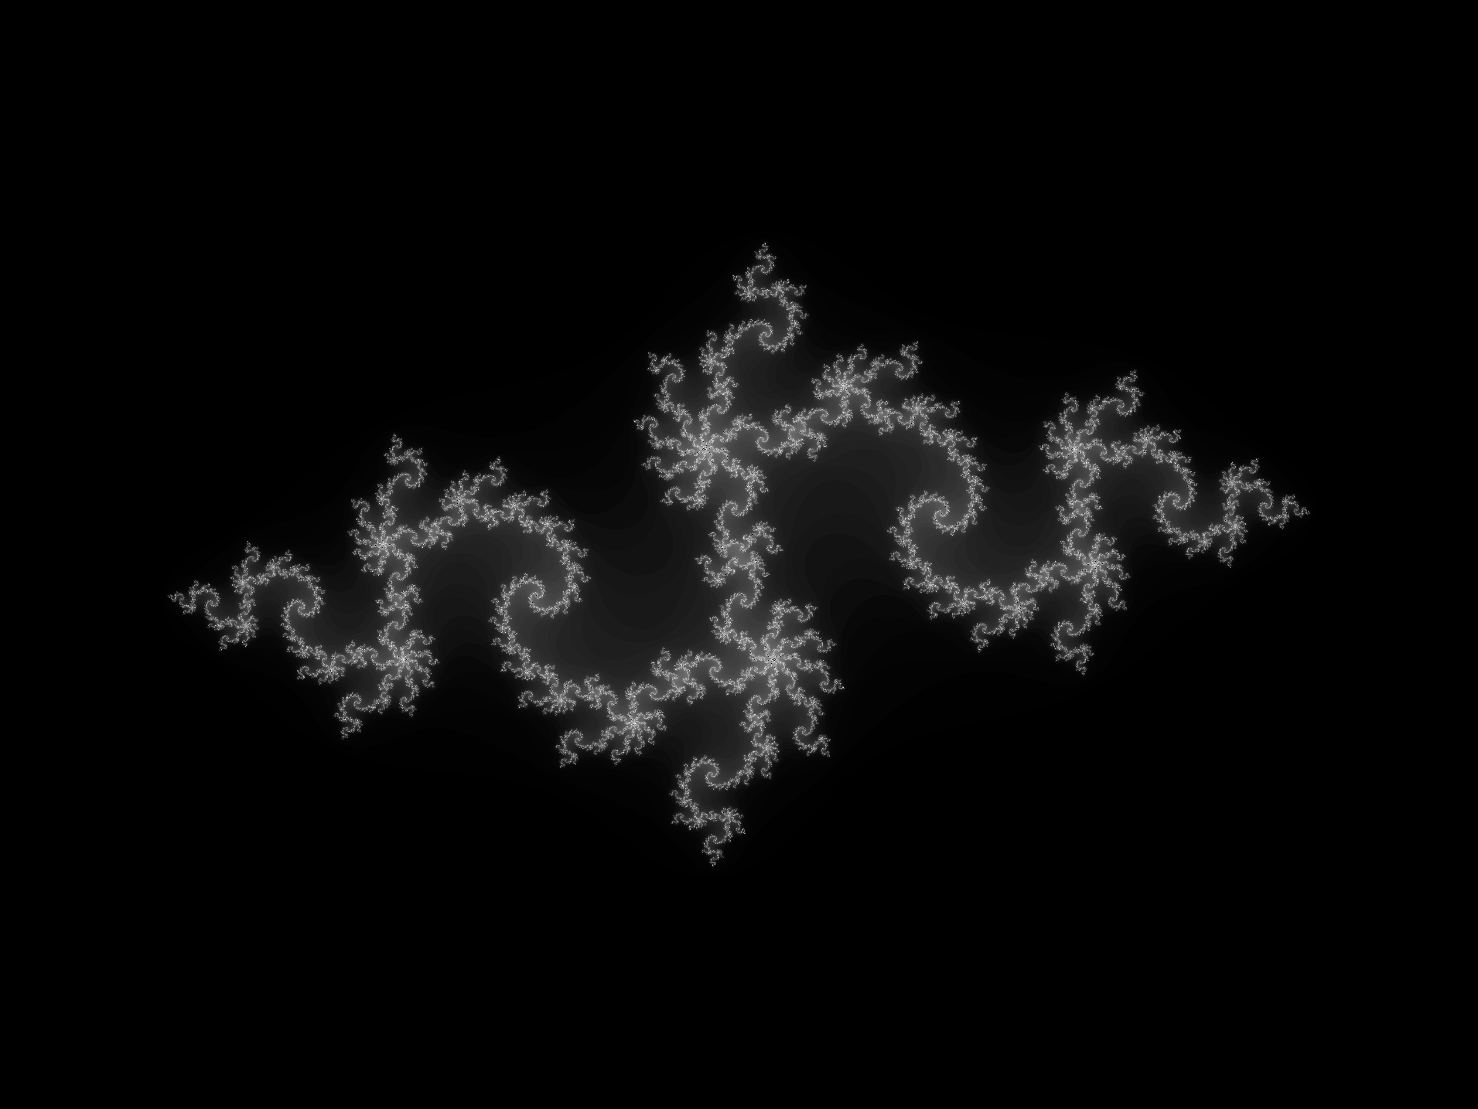 A screenshot of a fractal rendered with the aid of Hare’s new complex number
support